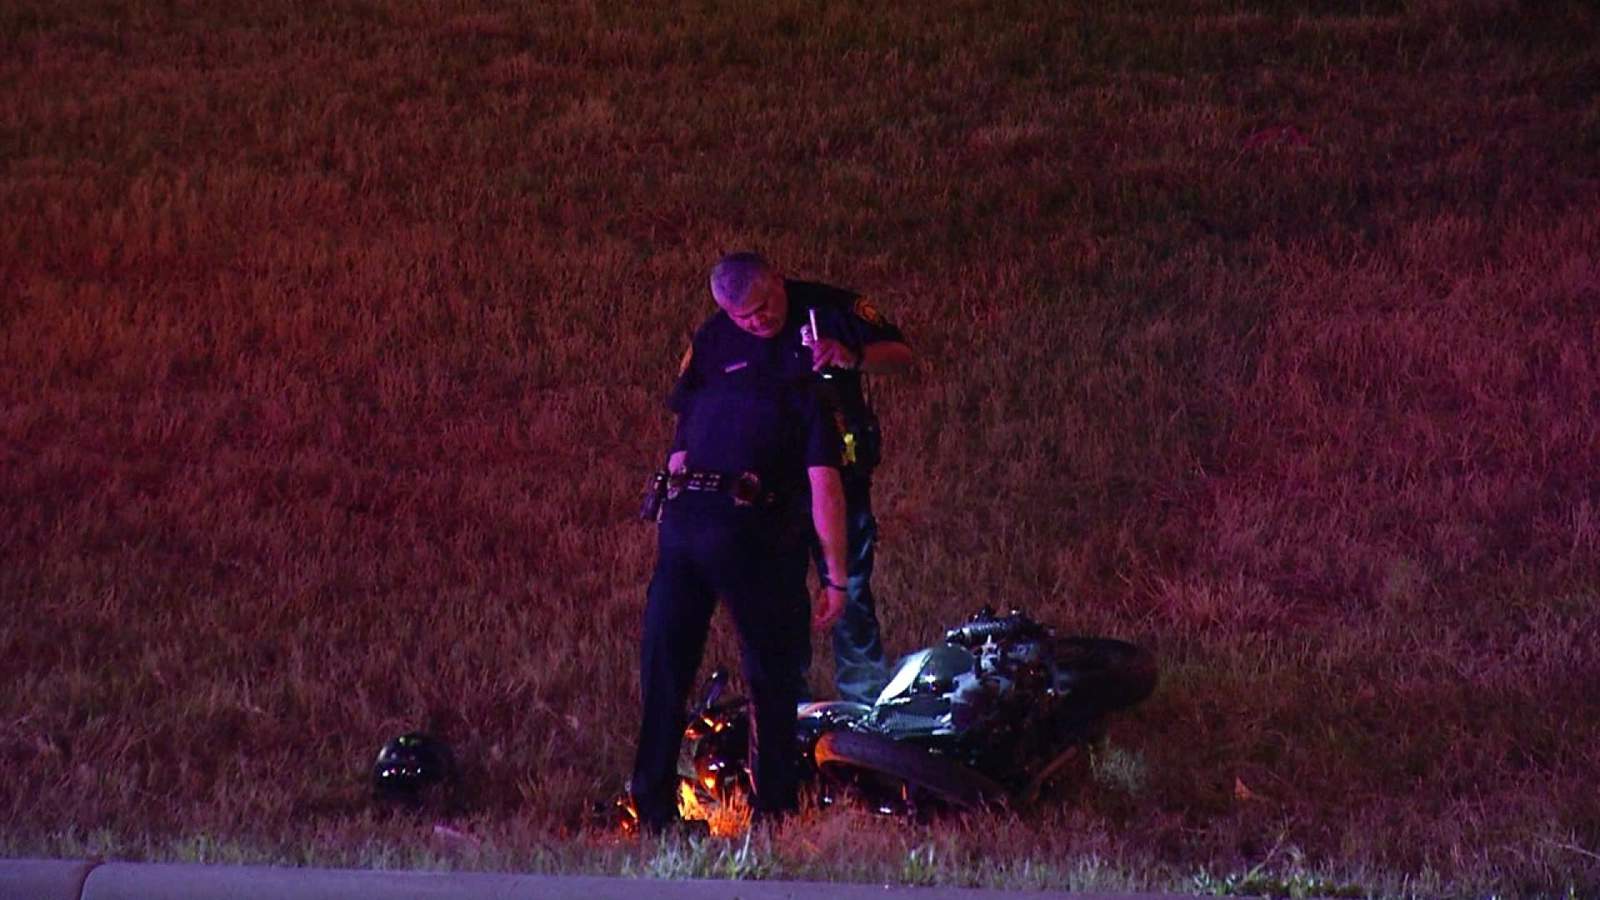 SAPD: Motorcyclist detained on suspicion of DWI after crashing bike